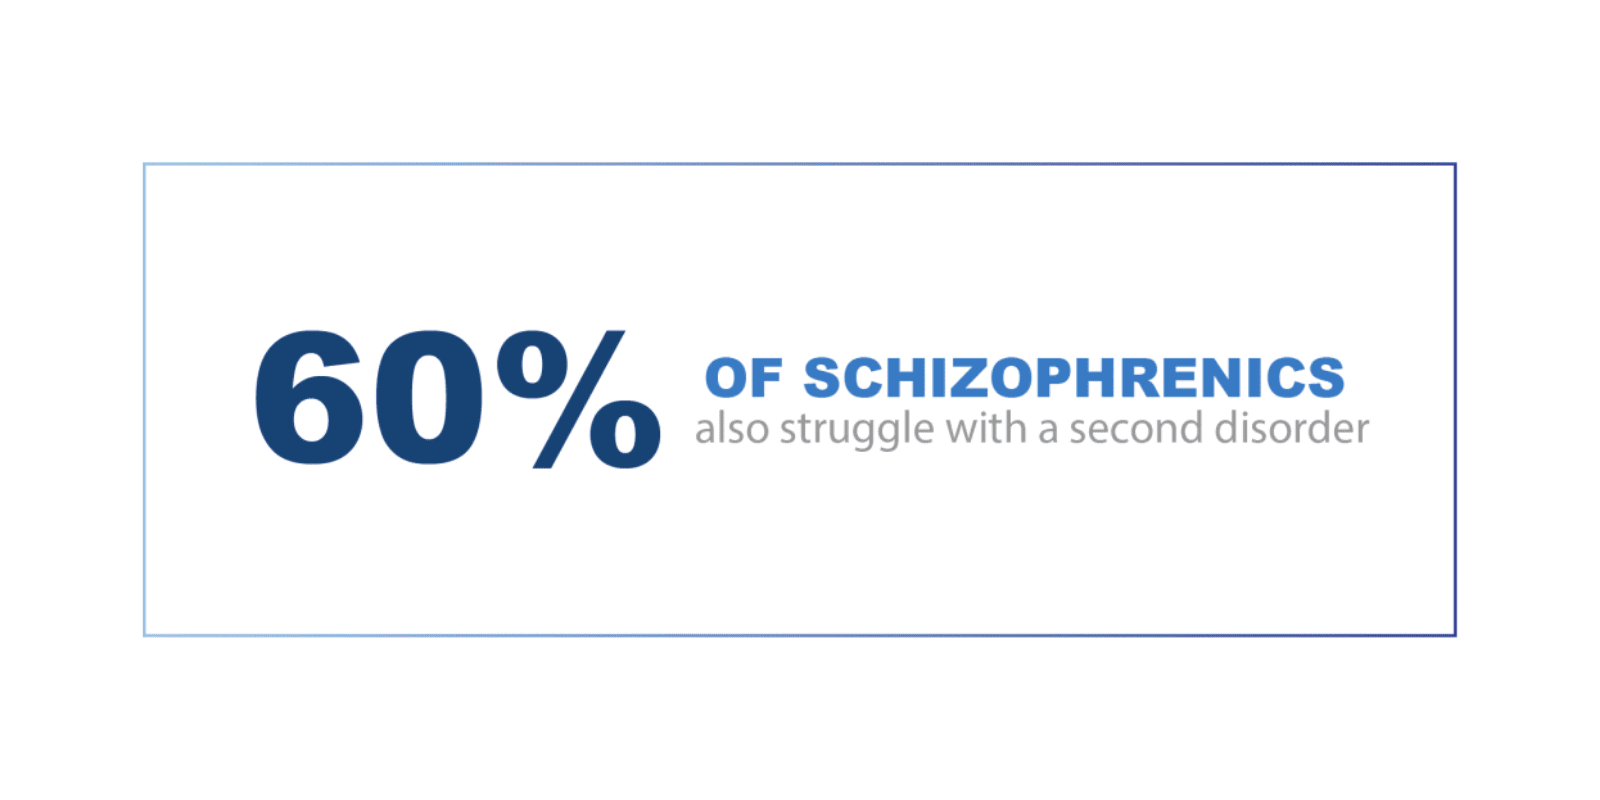 60% of schizophrenics also struggle with a second disorder